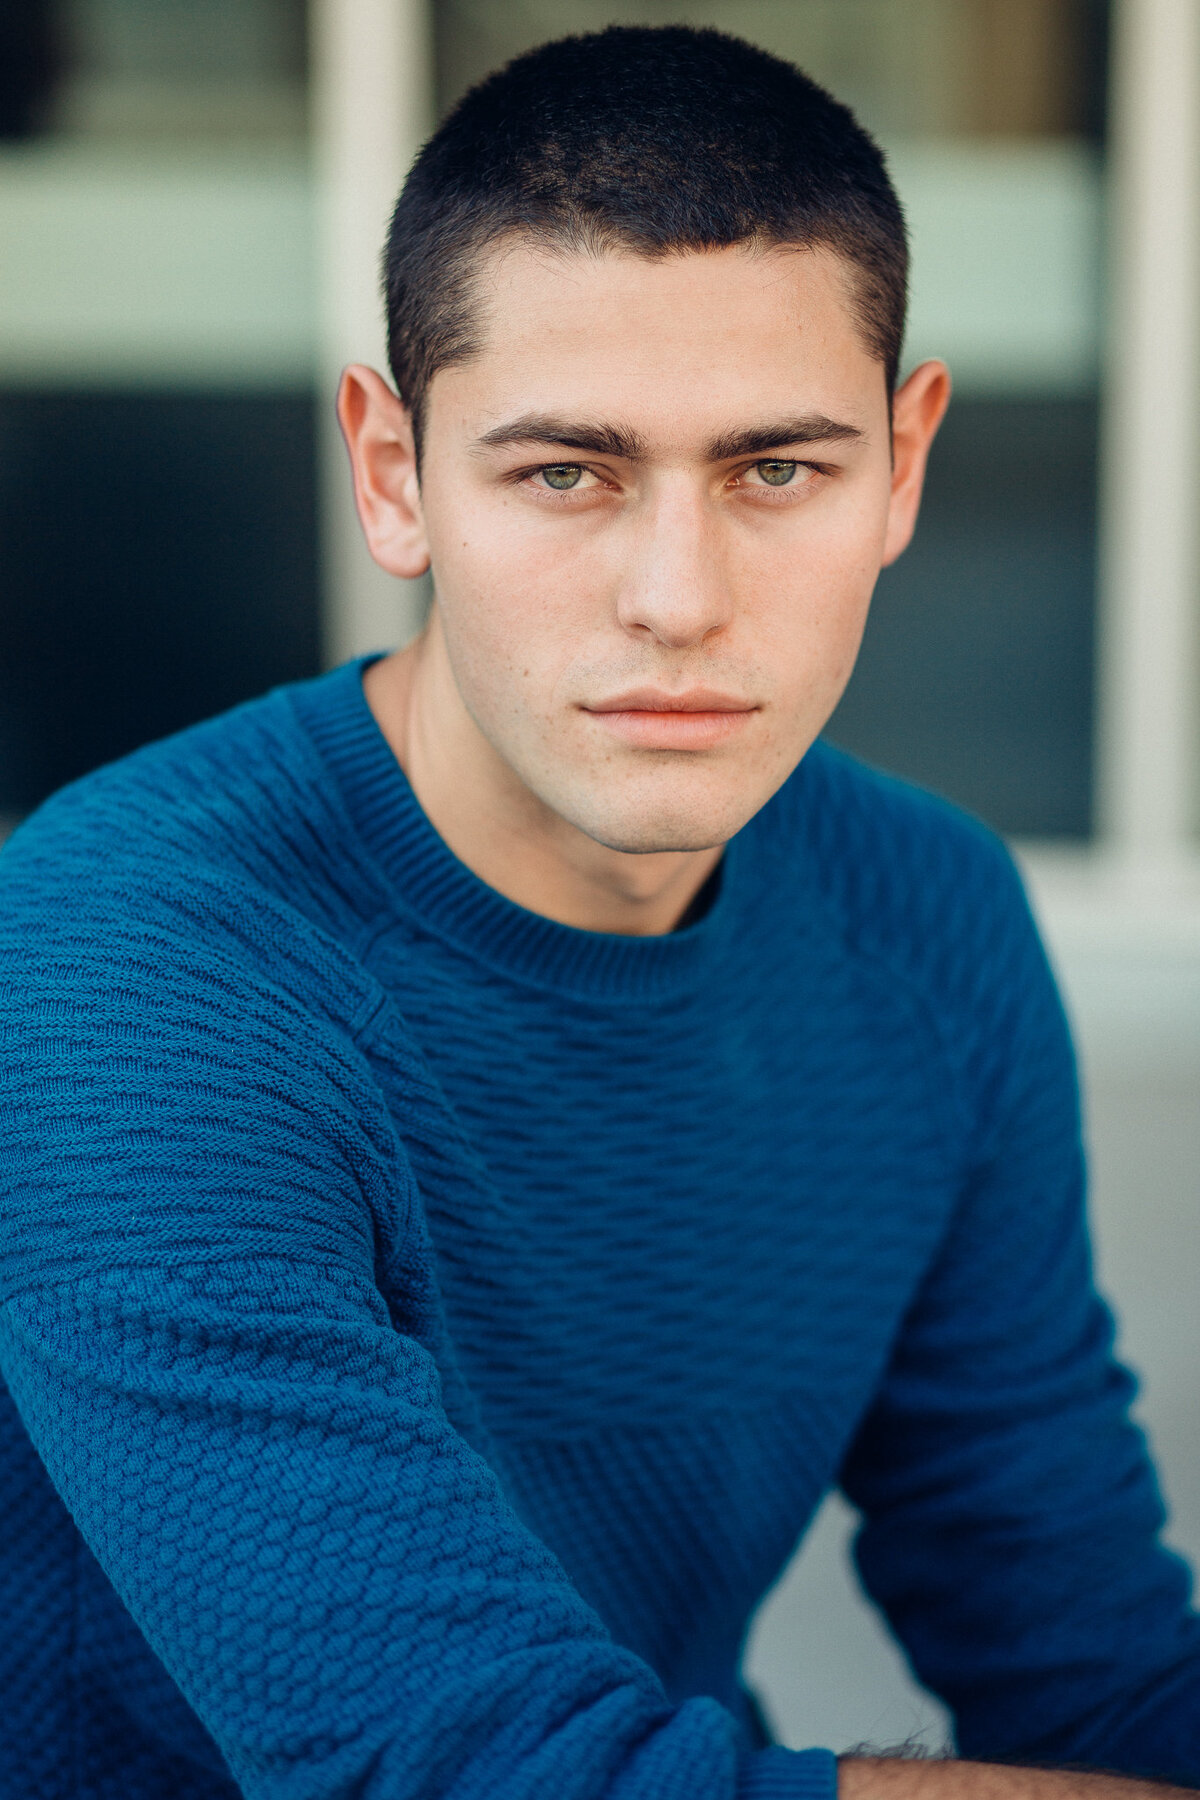 Headshot Photograph Of Young Man In Blue Sweat Shirt Los Angeles